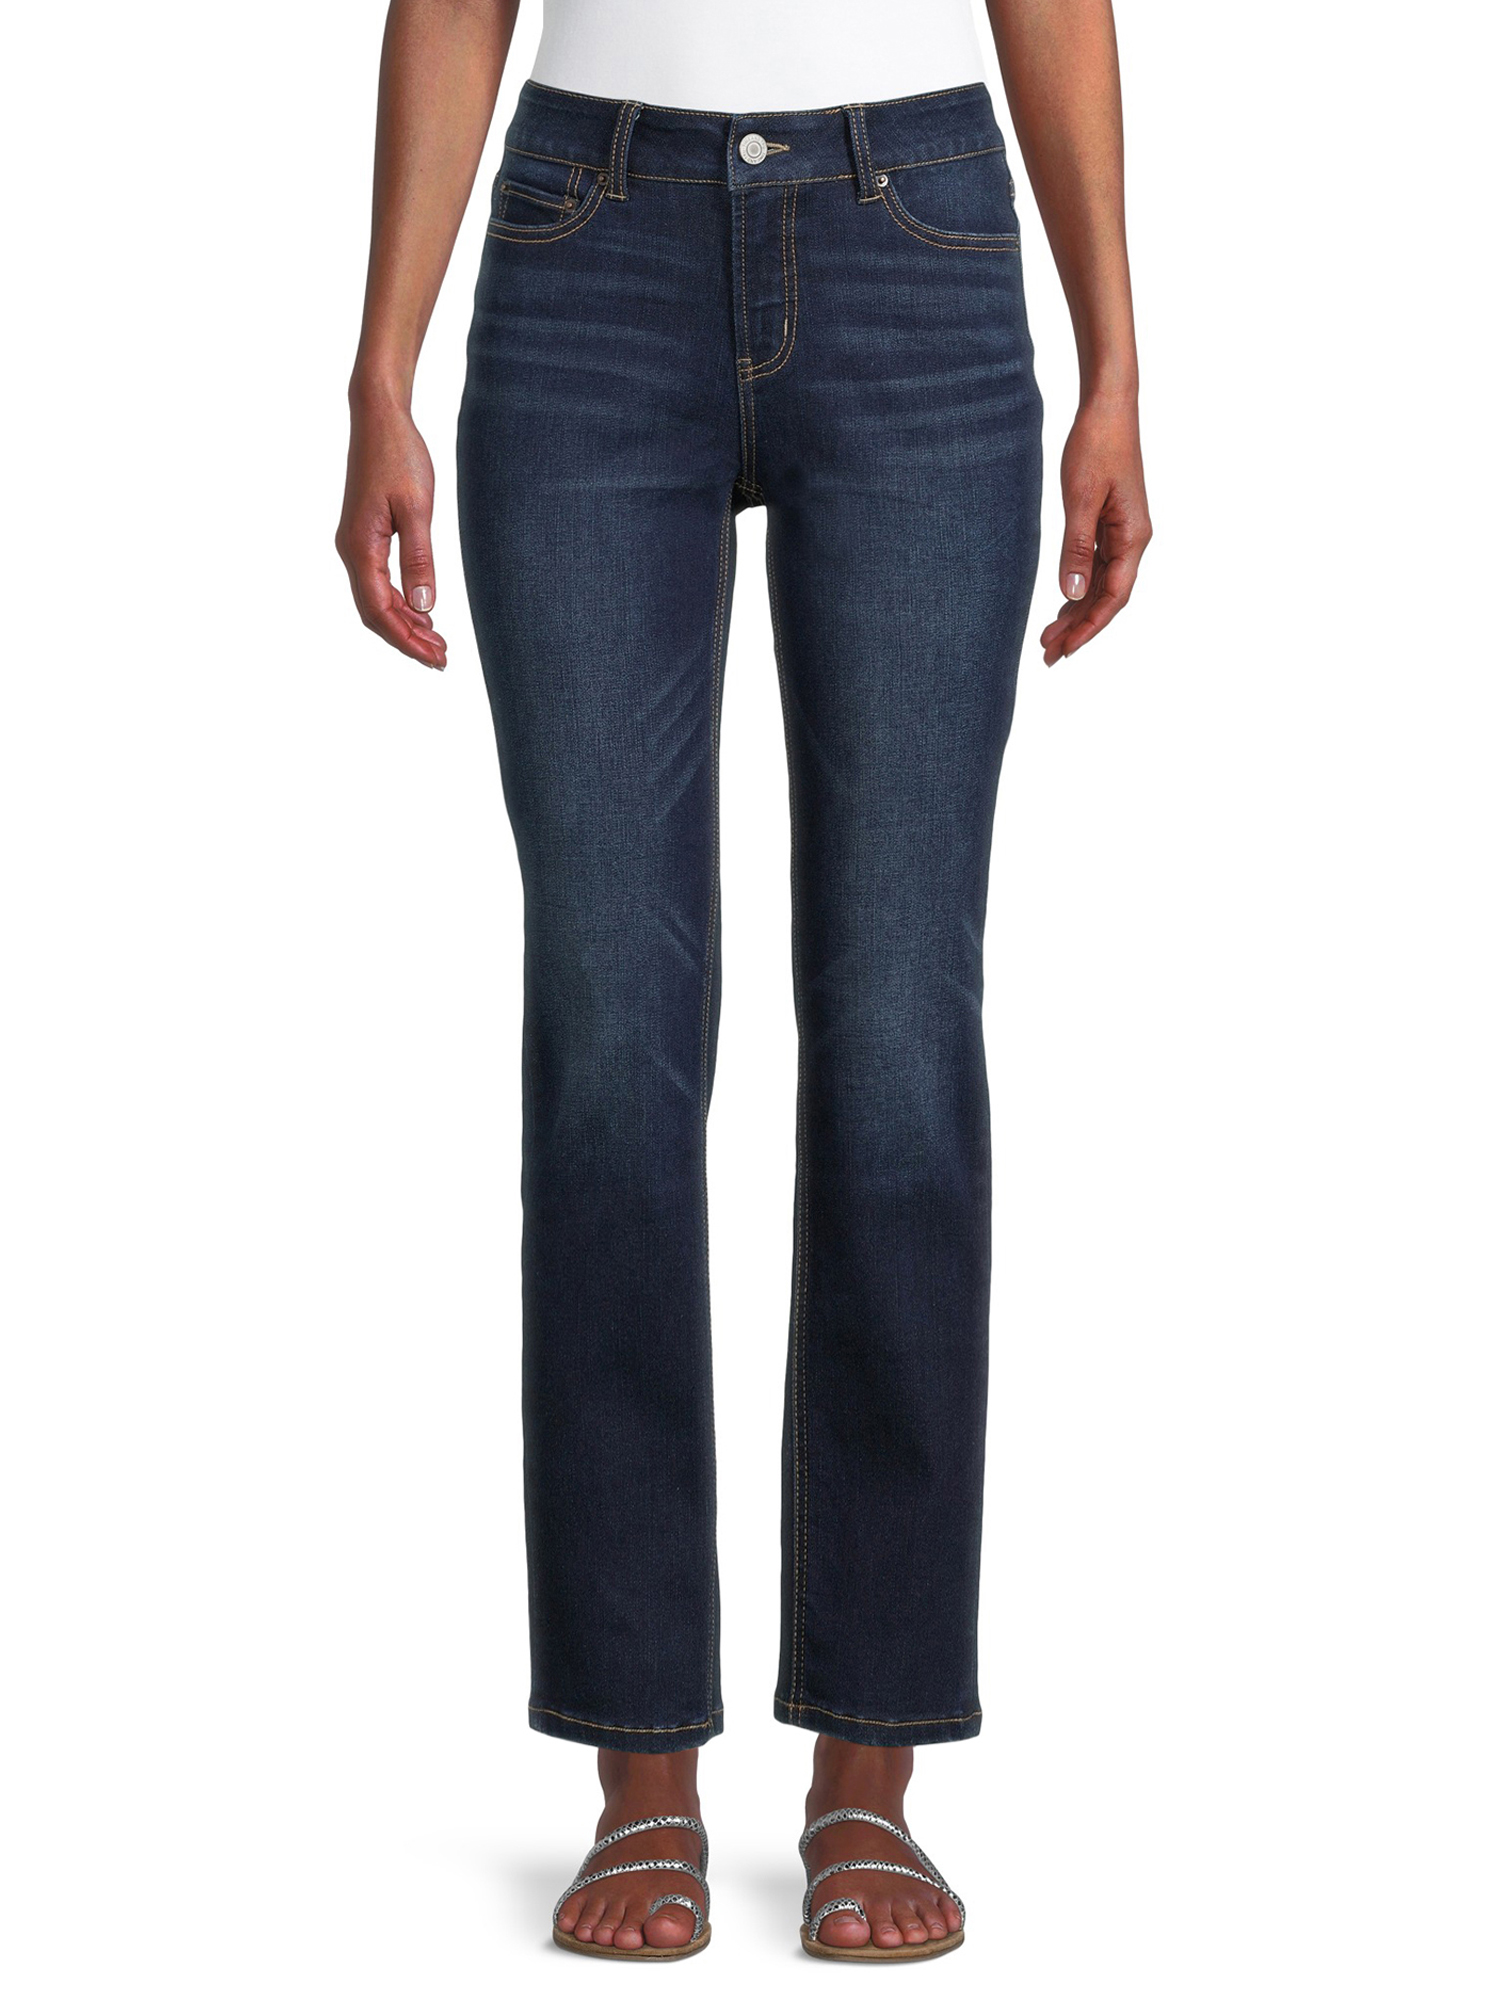 Time and Tru Women’s Mid Rise Straight Jeans, 29" Inseam for Regular, Sizes 2-18 - image 1 of 6